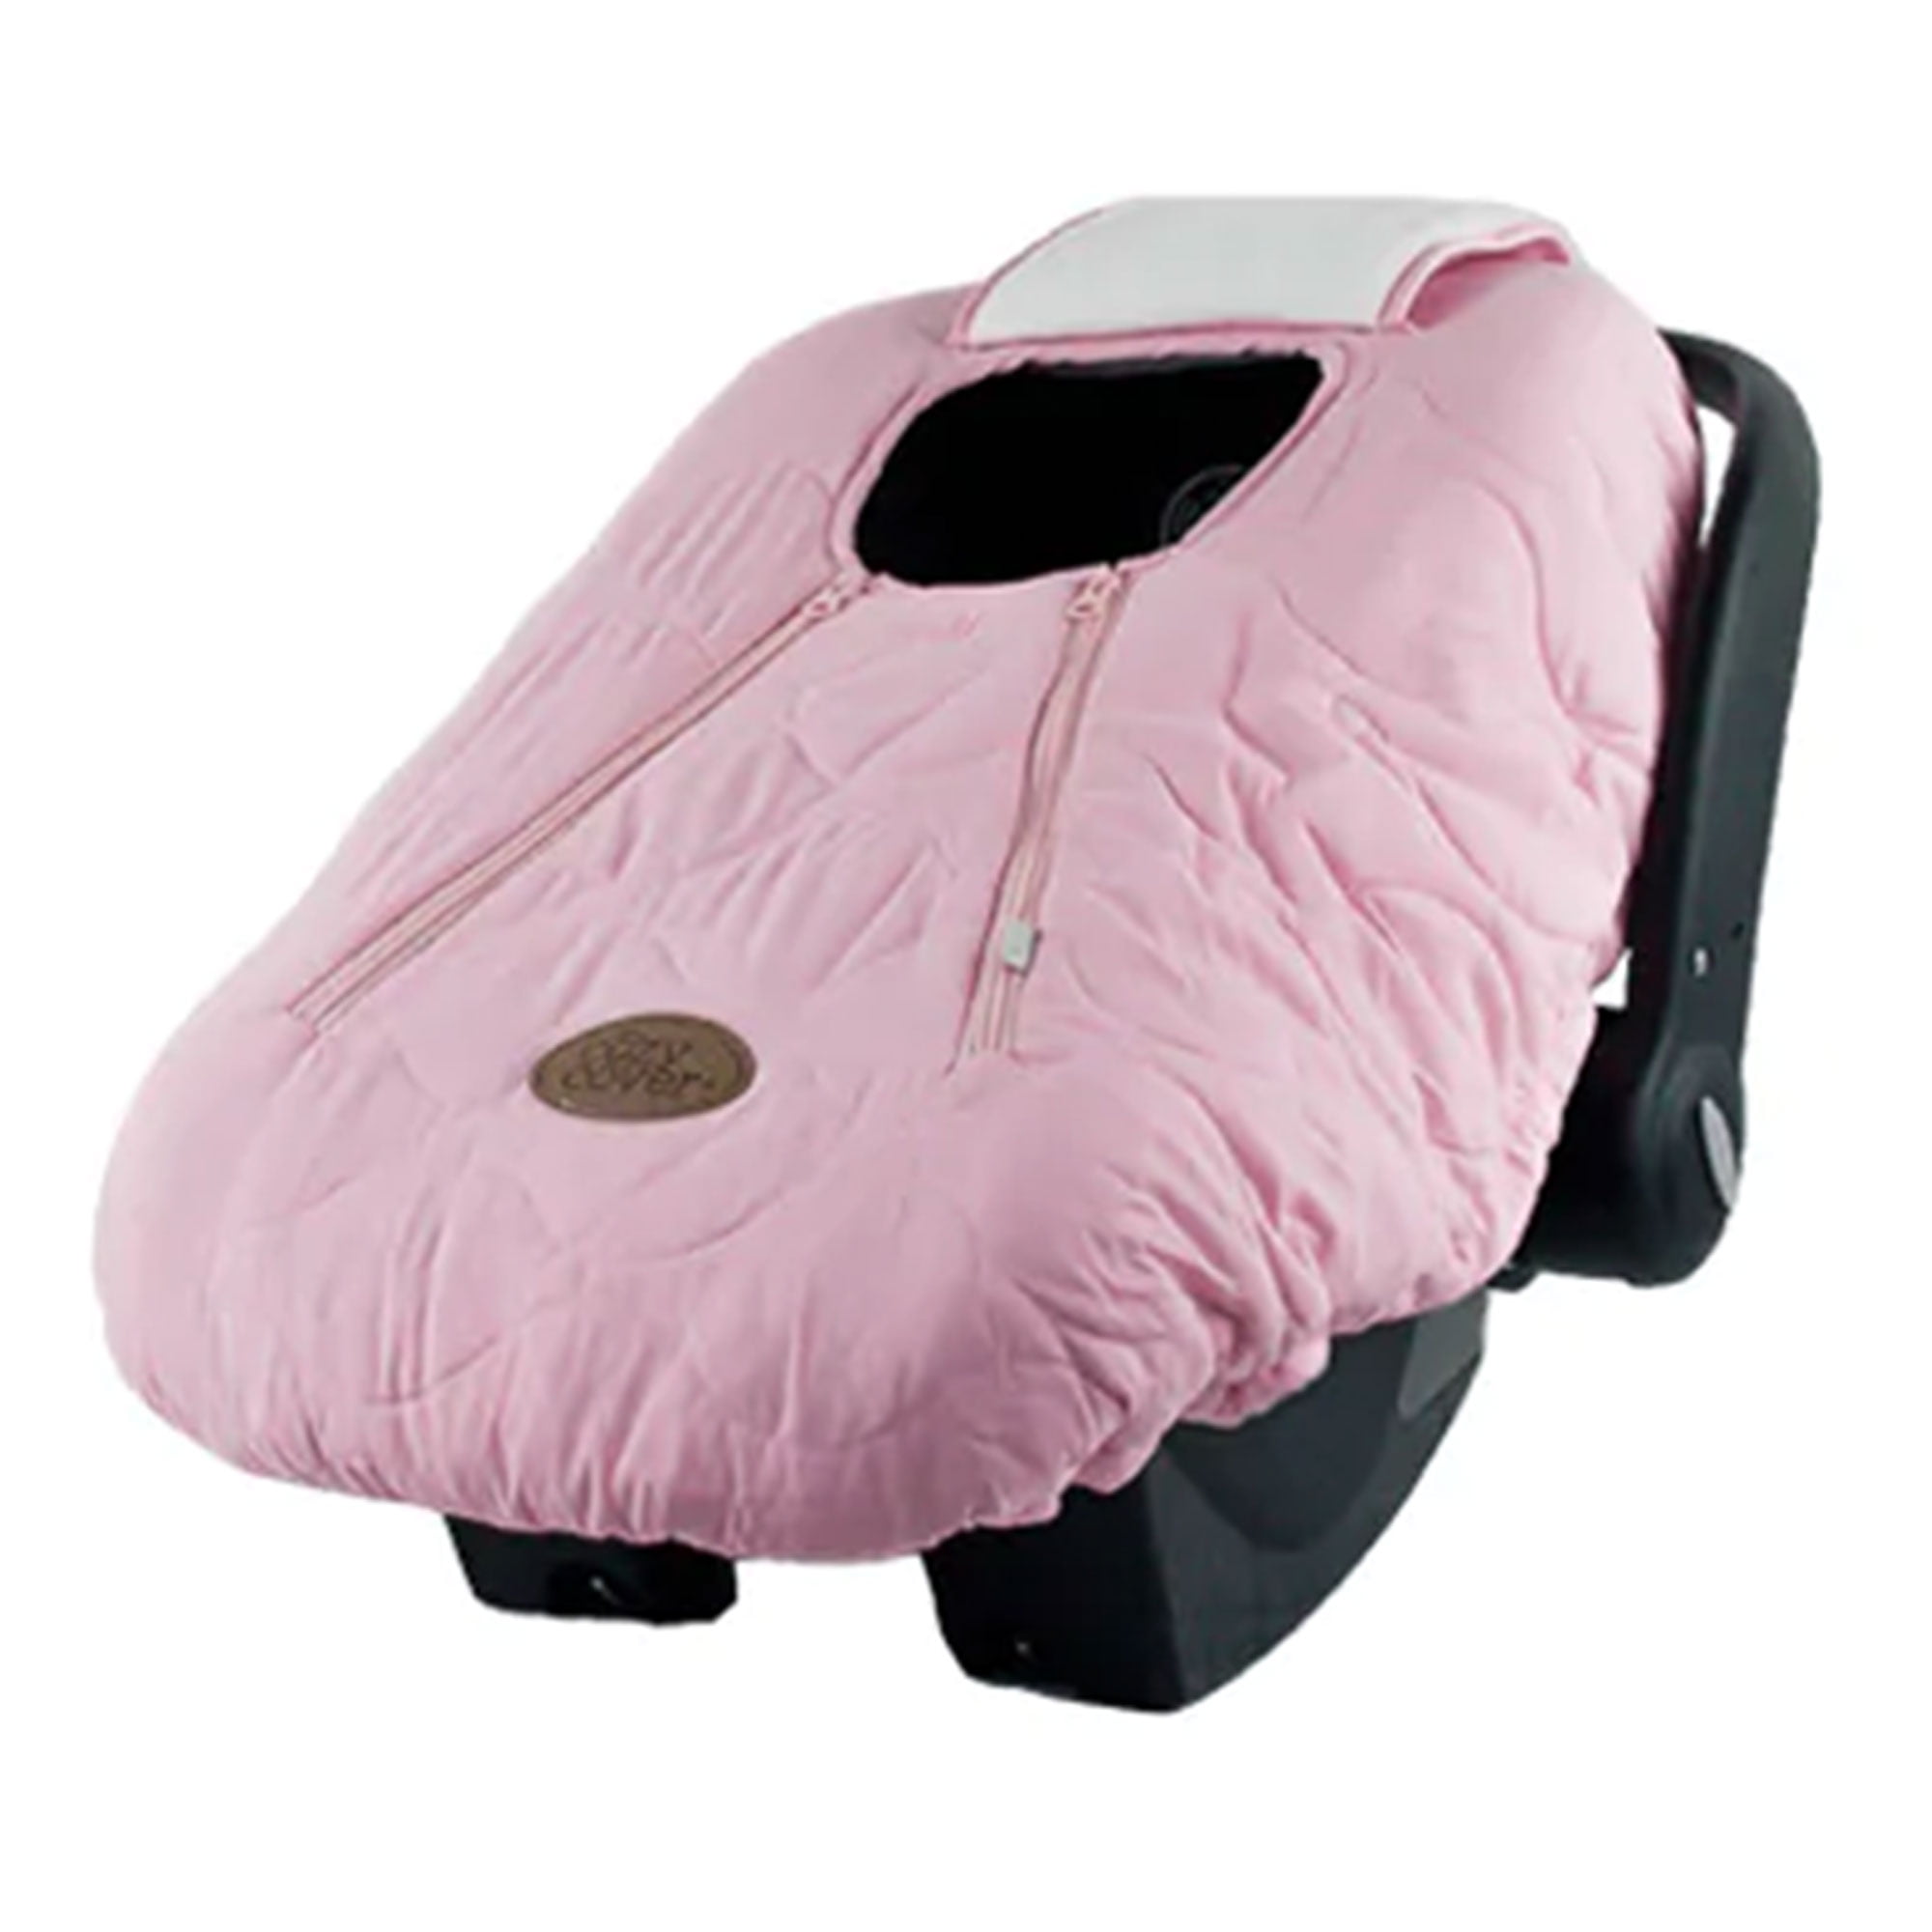 Nacelle Windoo Pink Mattress Cover - Streeley - Quinny - Prelude